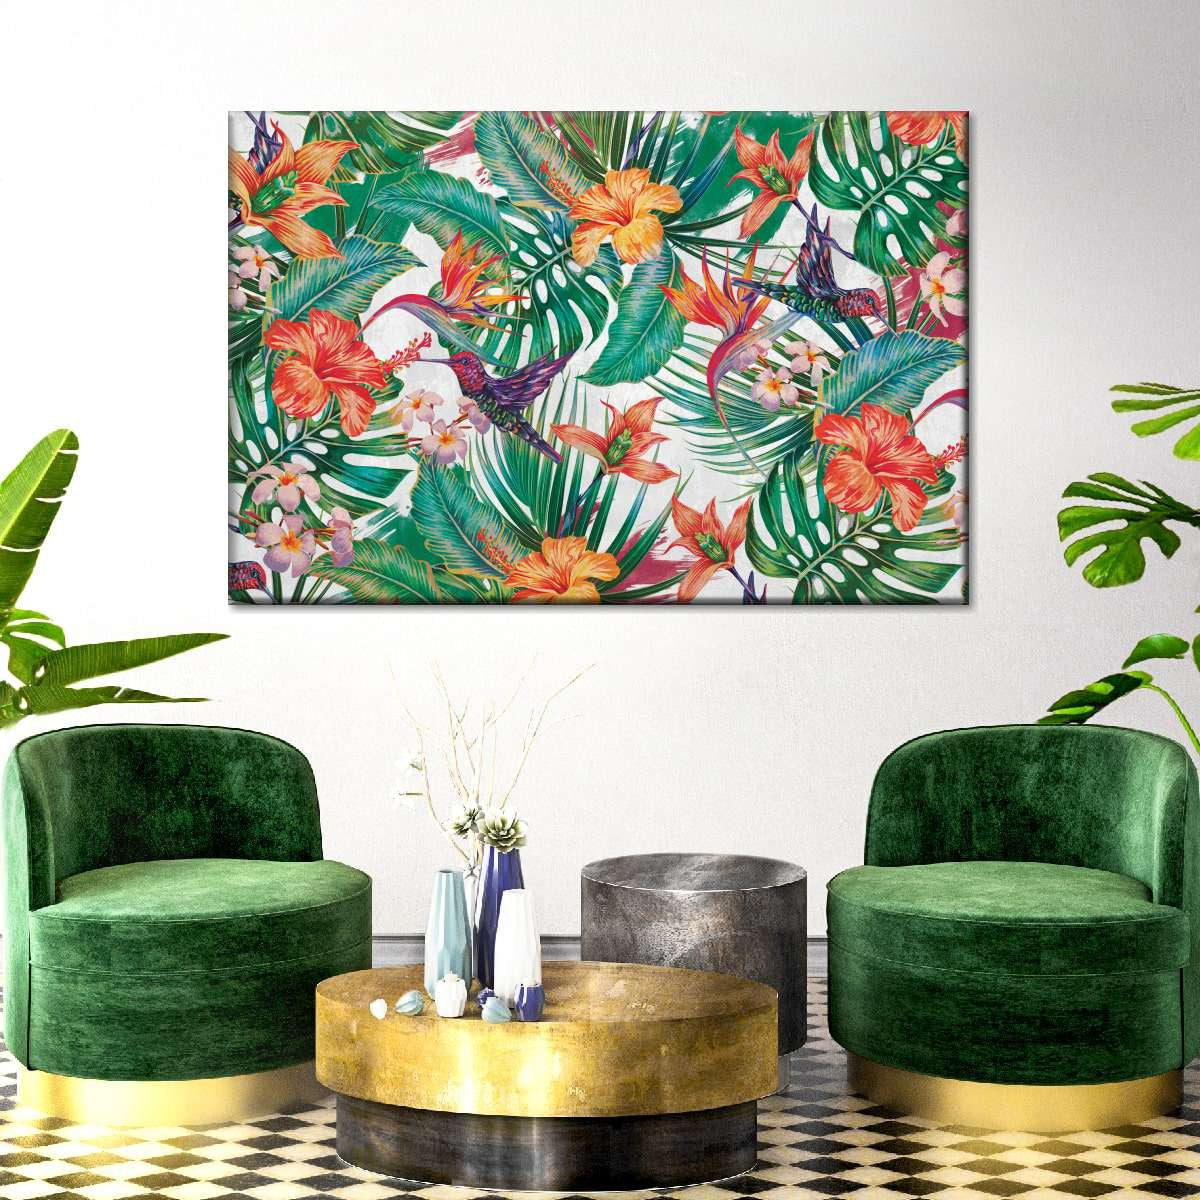 Embrace Summer with Palm-Inspired Wall Art